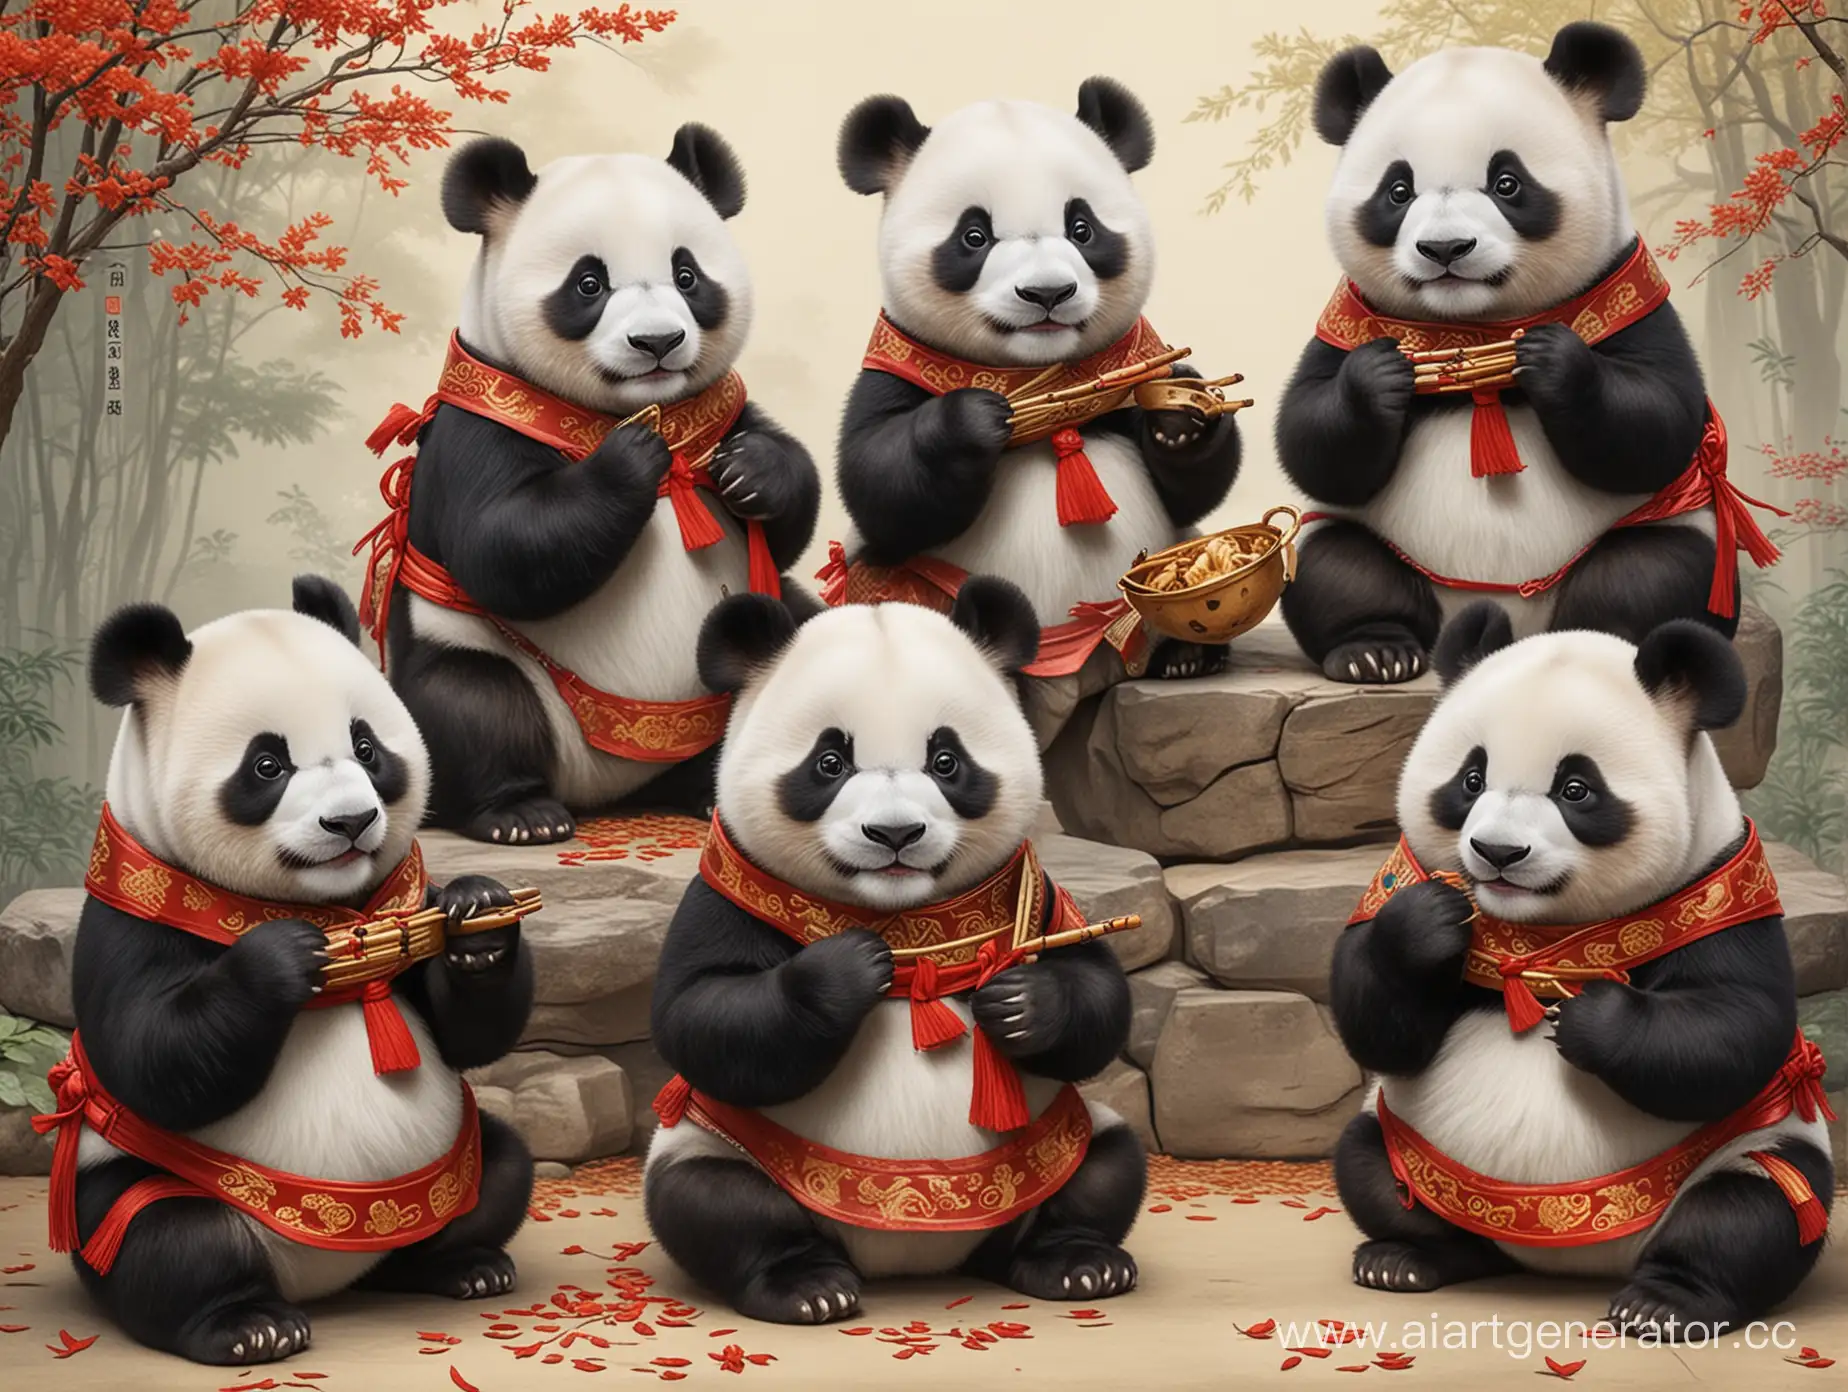 Adorable-Pandas-Embracing-Chinese-Traditions